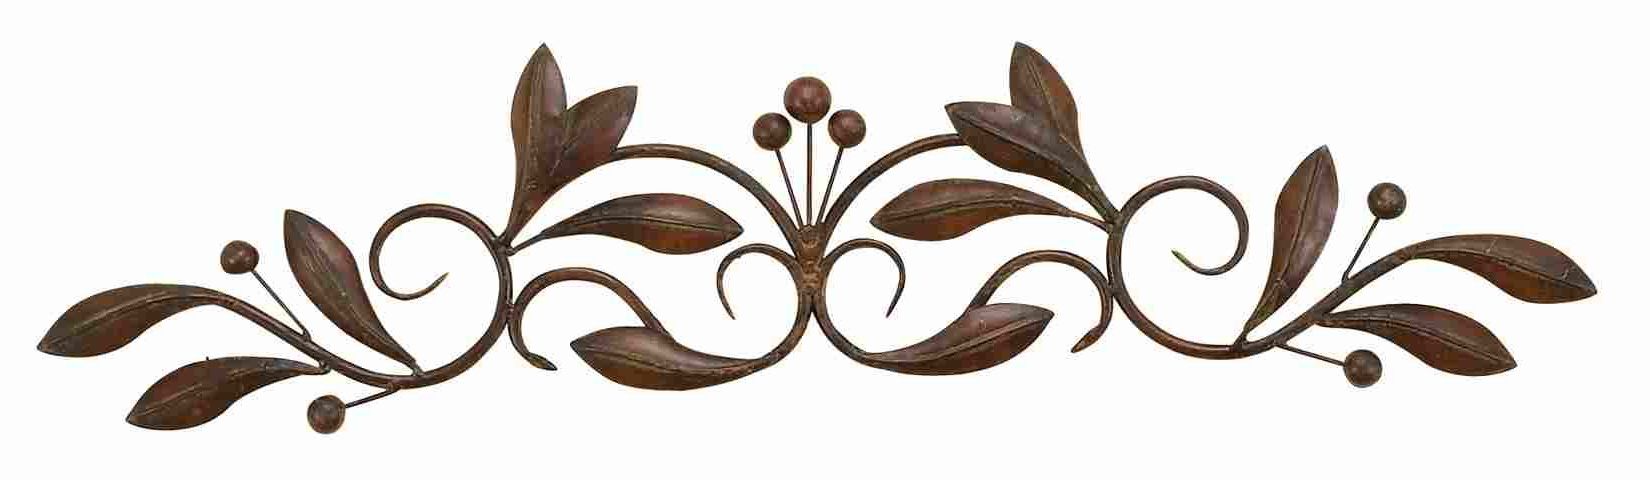 Brushed 3d Relief Metal Wall Art Inside Scroll Leaf Wall Decor (View 18 of 20)